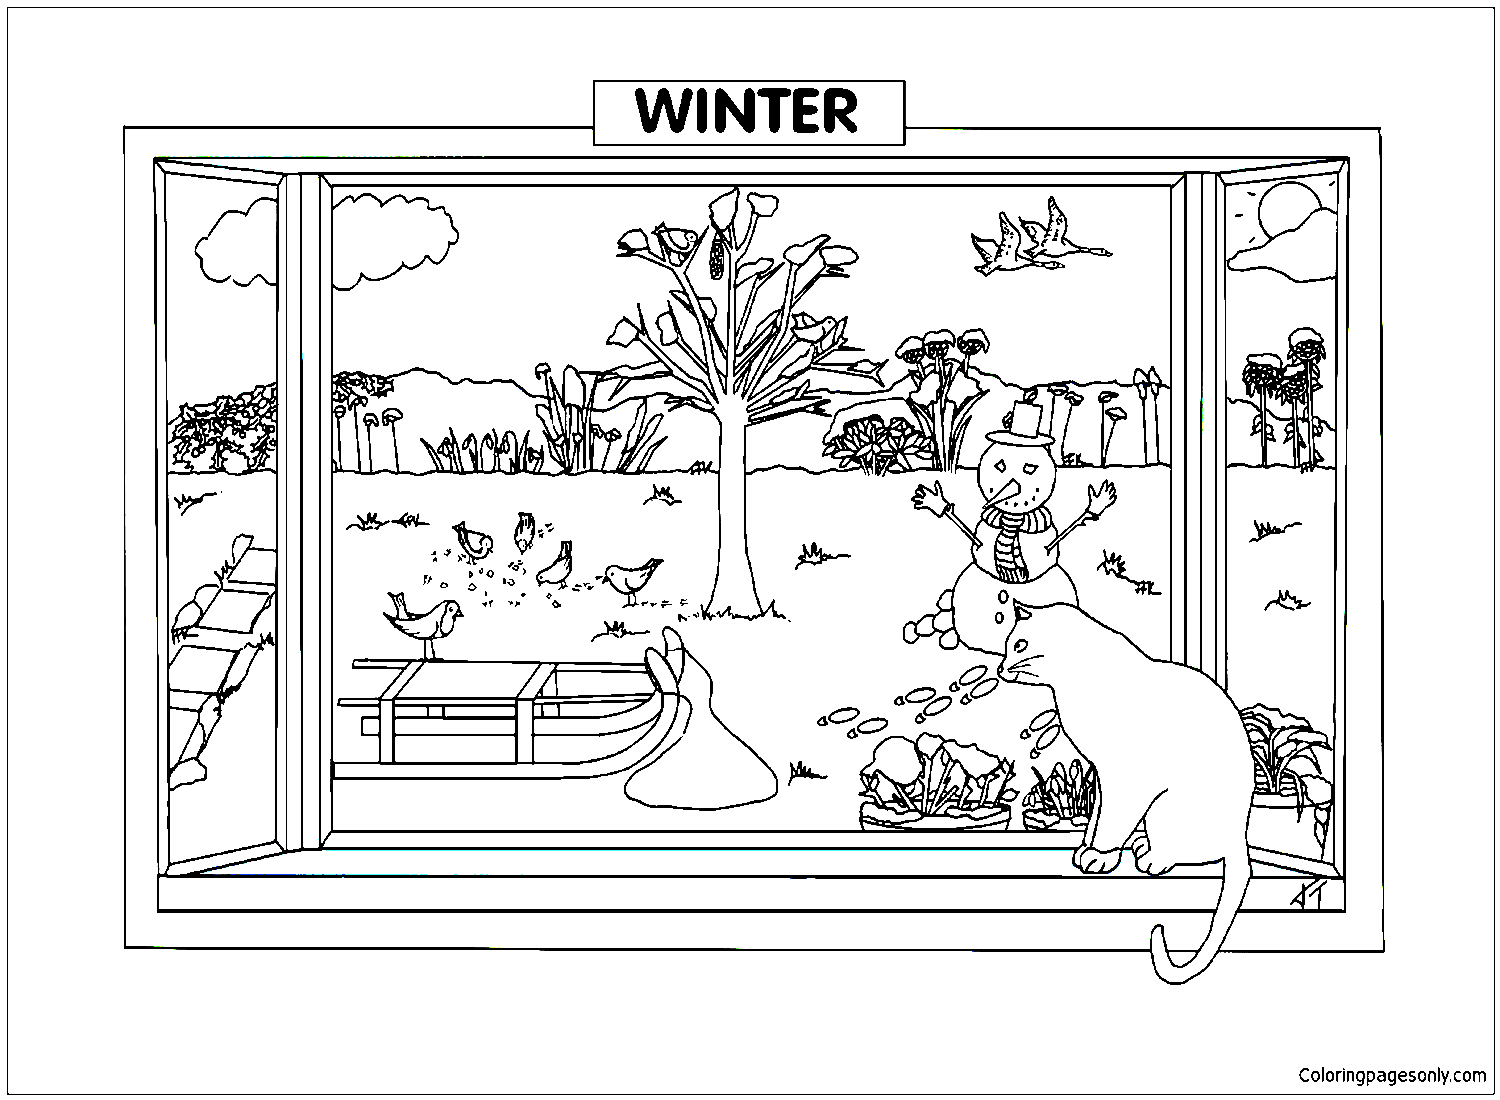 Winter Sence Coloring Page